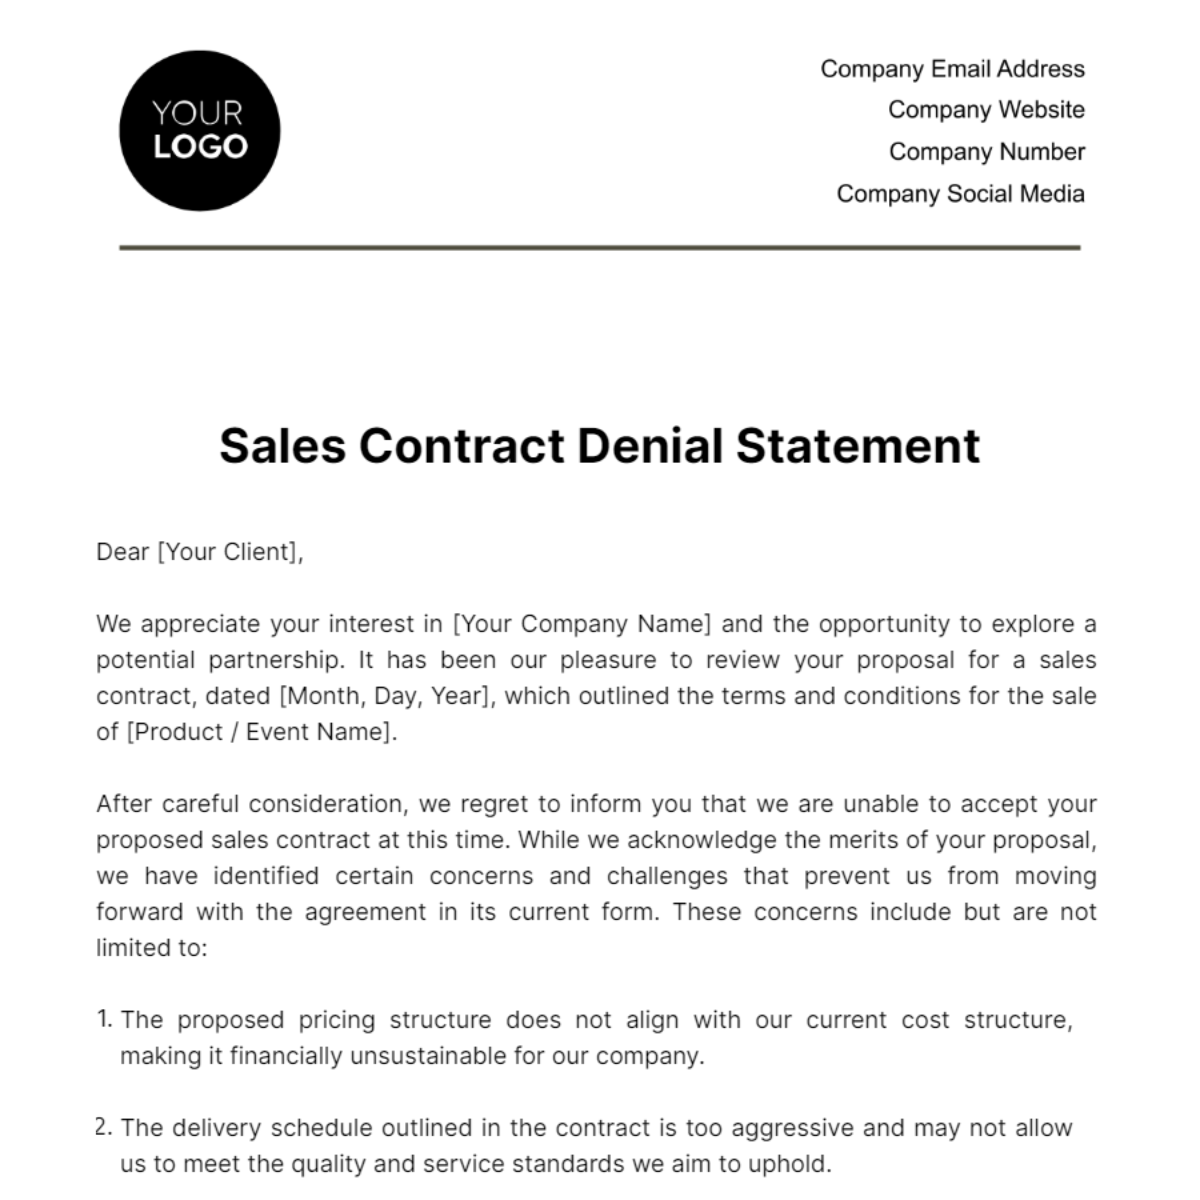 Free Sales Contract Denial Statement Template